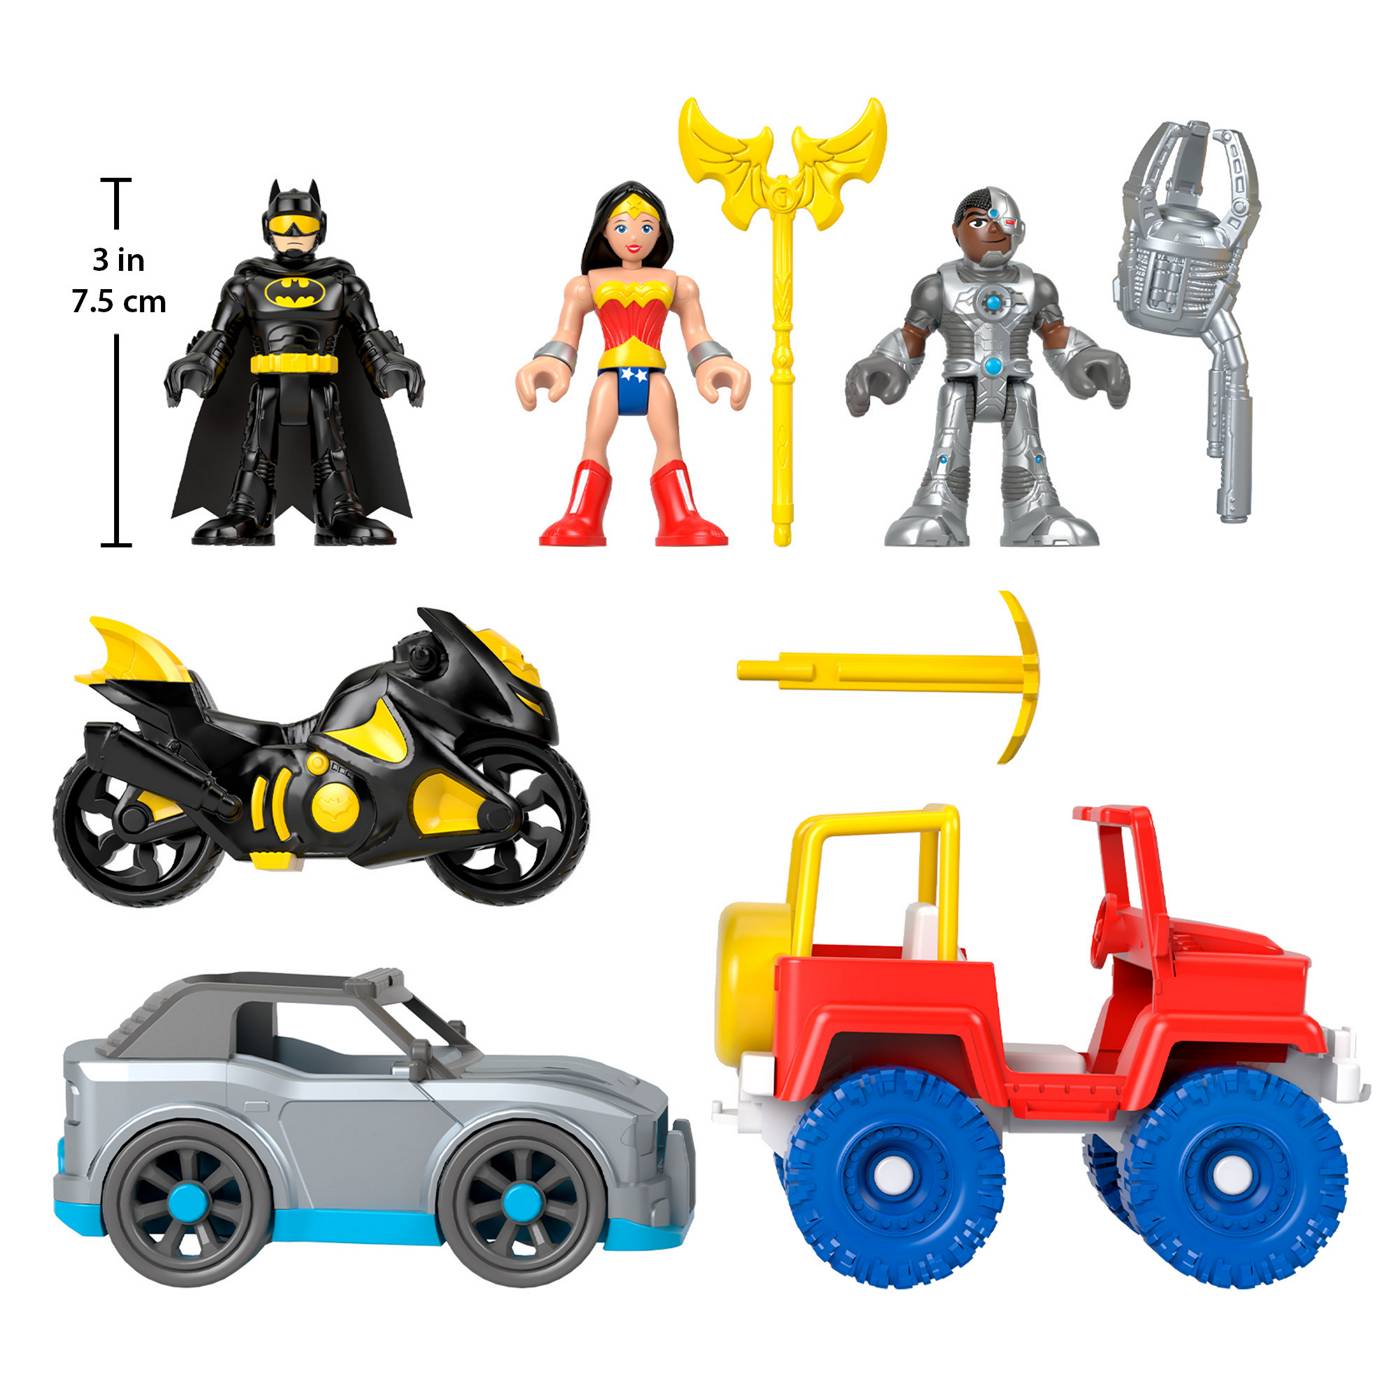 Imaginext DC Super Friends Heroes Action Figure Playset; image 2 of 2